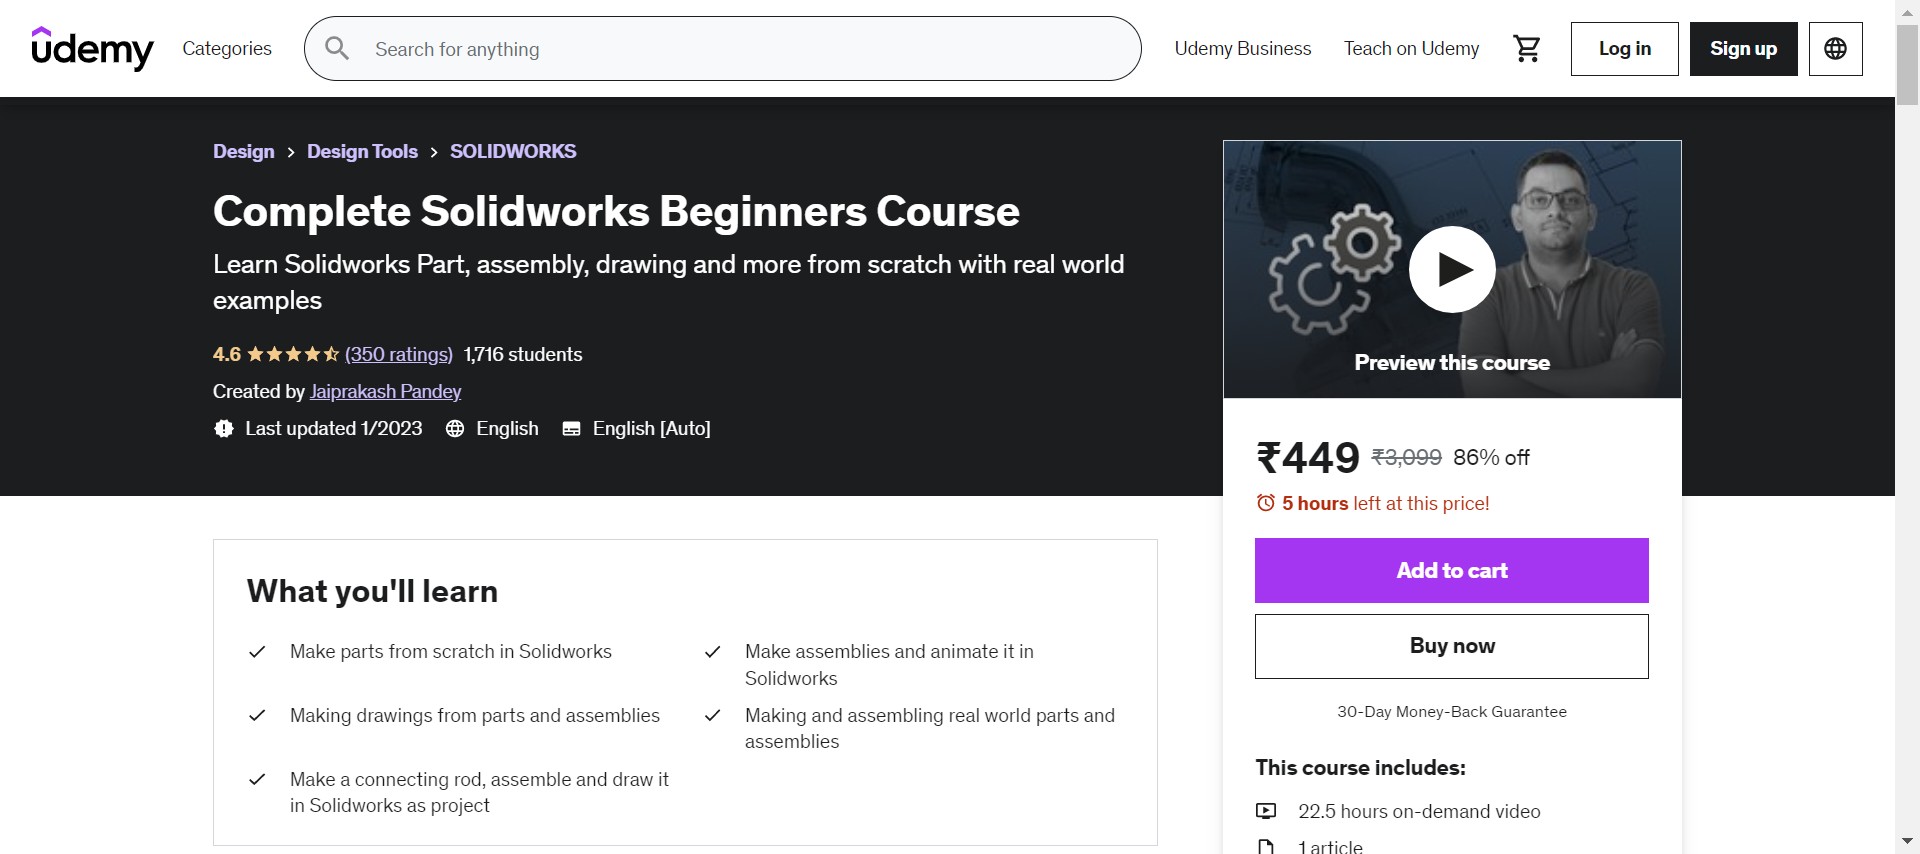 Complete Solidworks Beginners Course